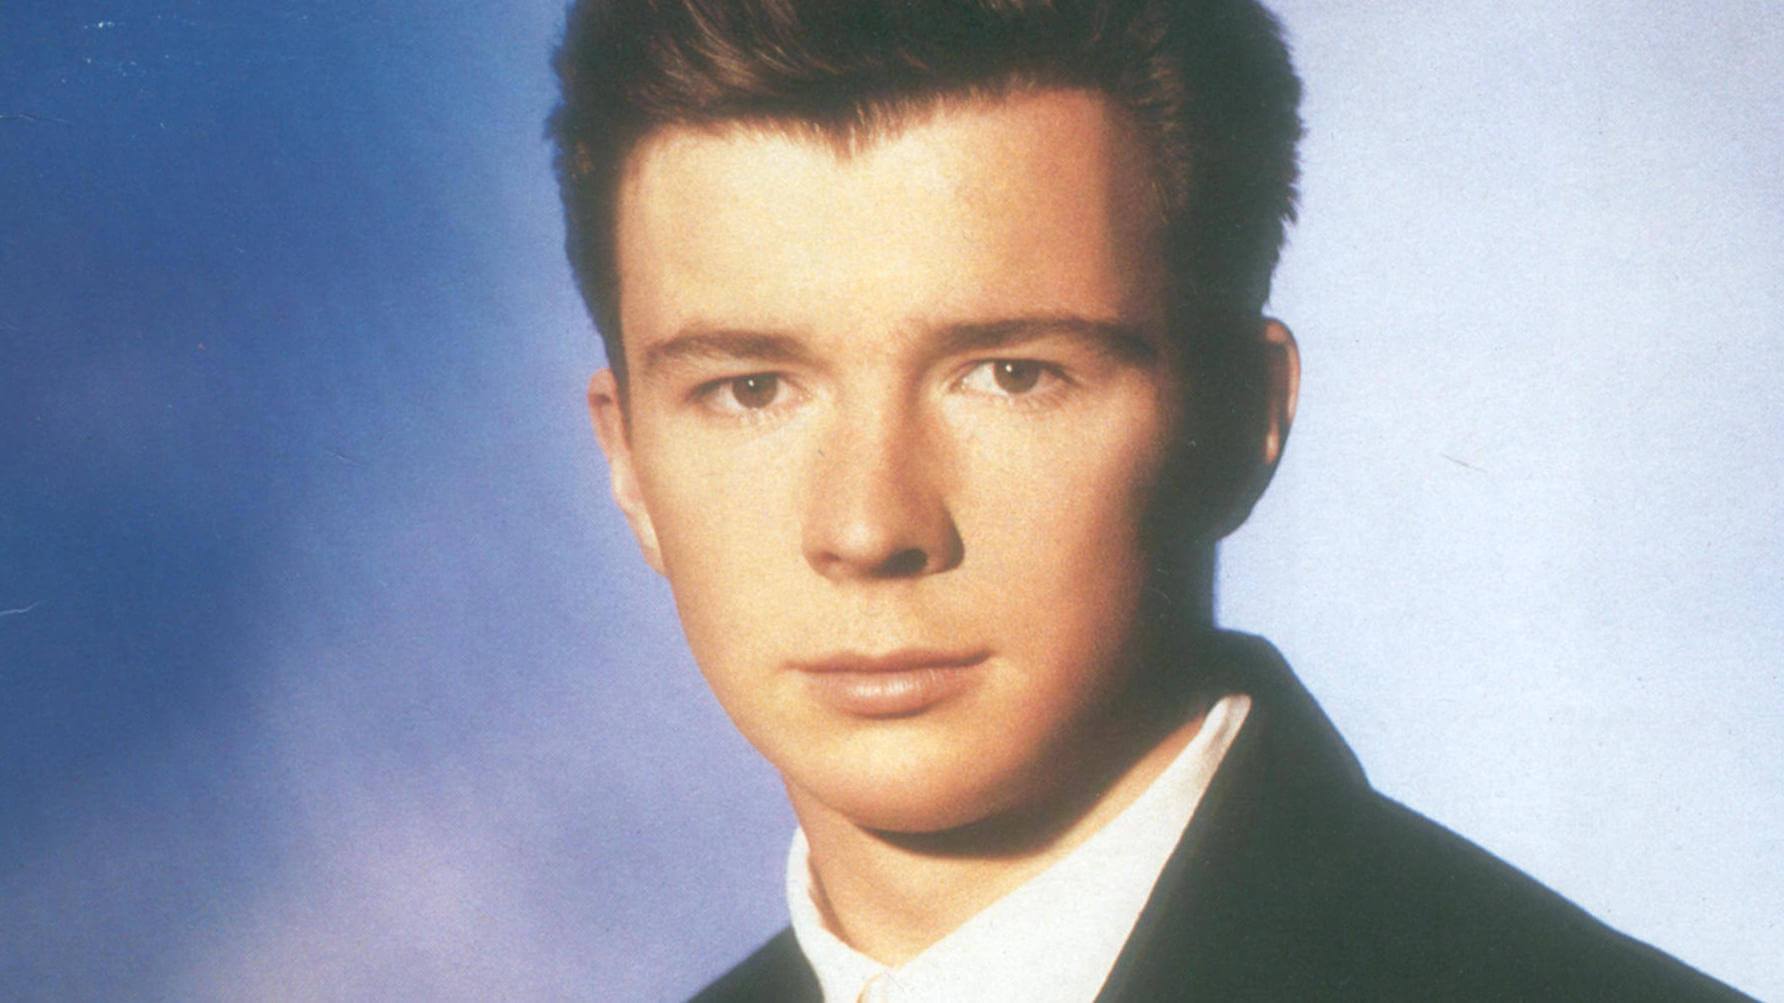 Rick Astley – Never Gonna Give You Up – in the 80s